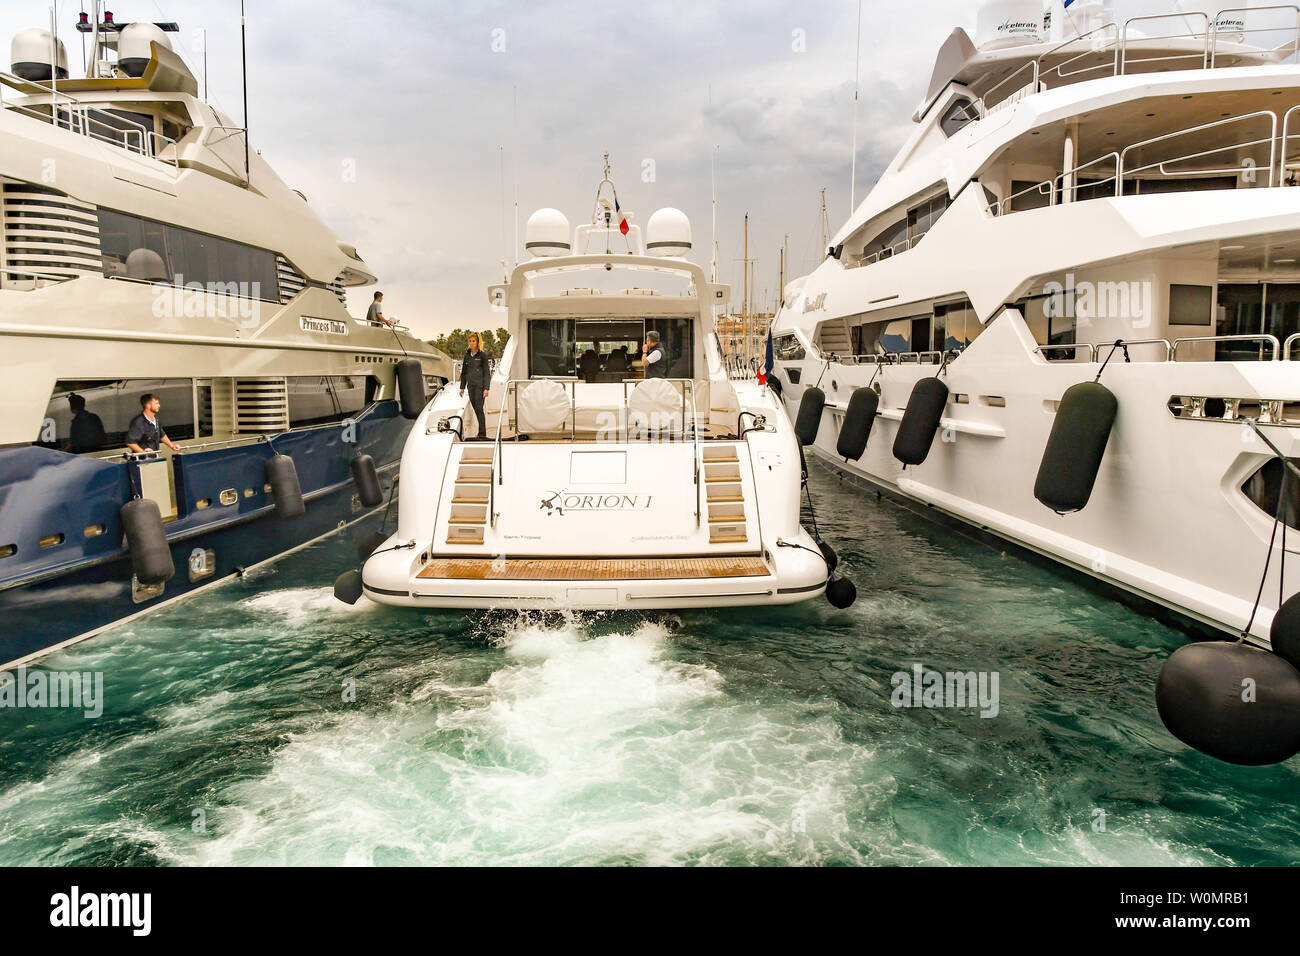 CANNES, FRANCE - APRIL 2019: Luxury motor yacht Orion I reversing into its harbour berth in Cannes. Stock Photo